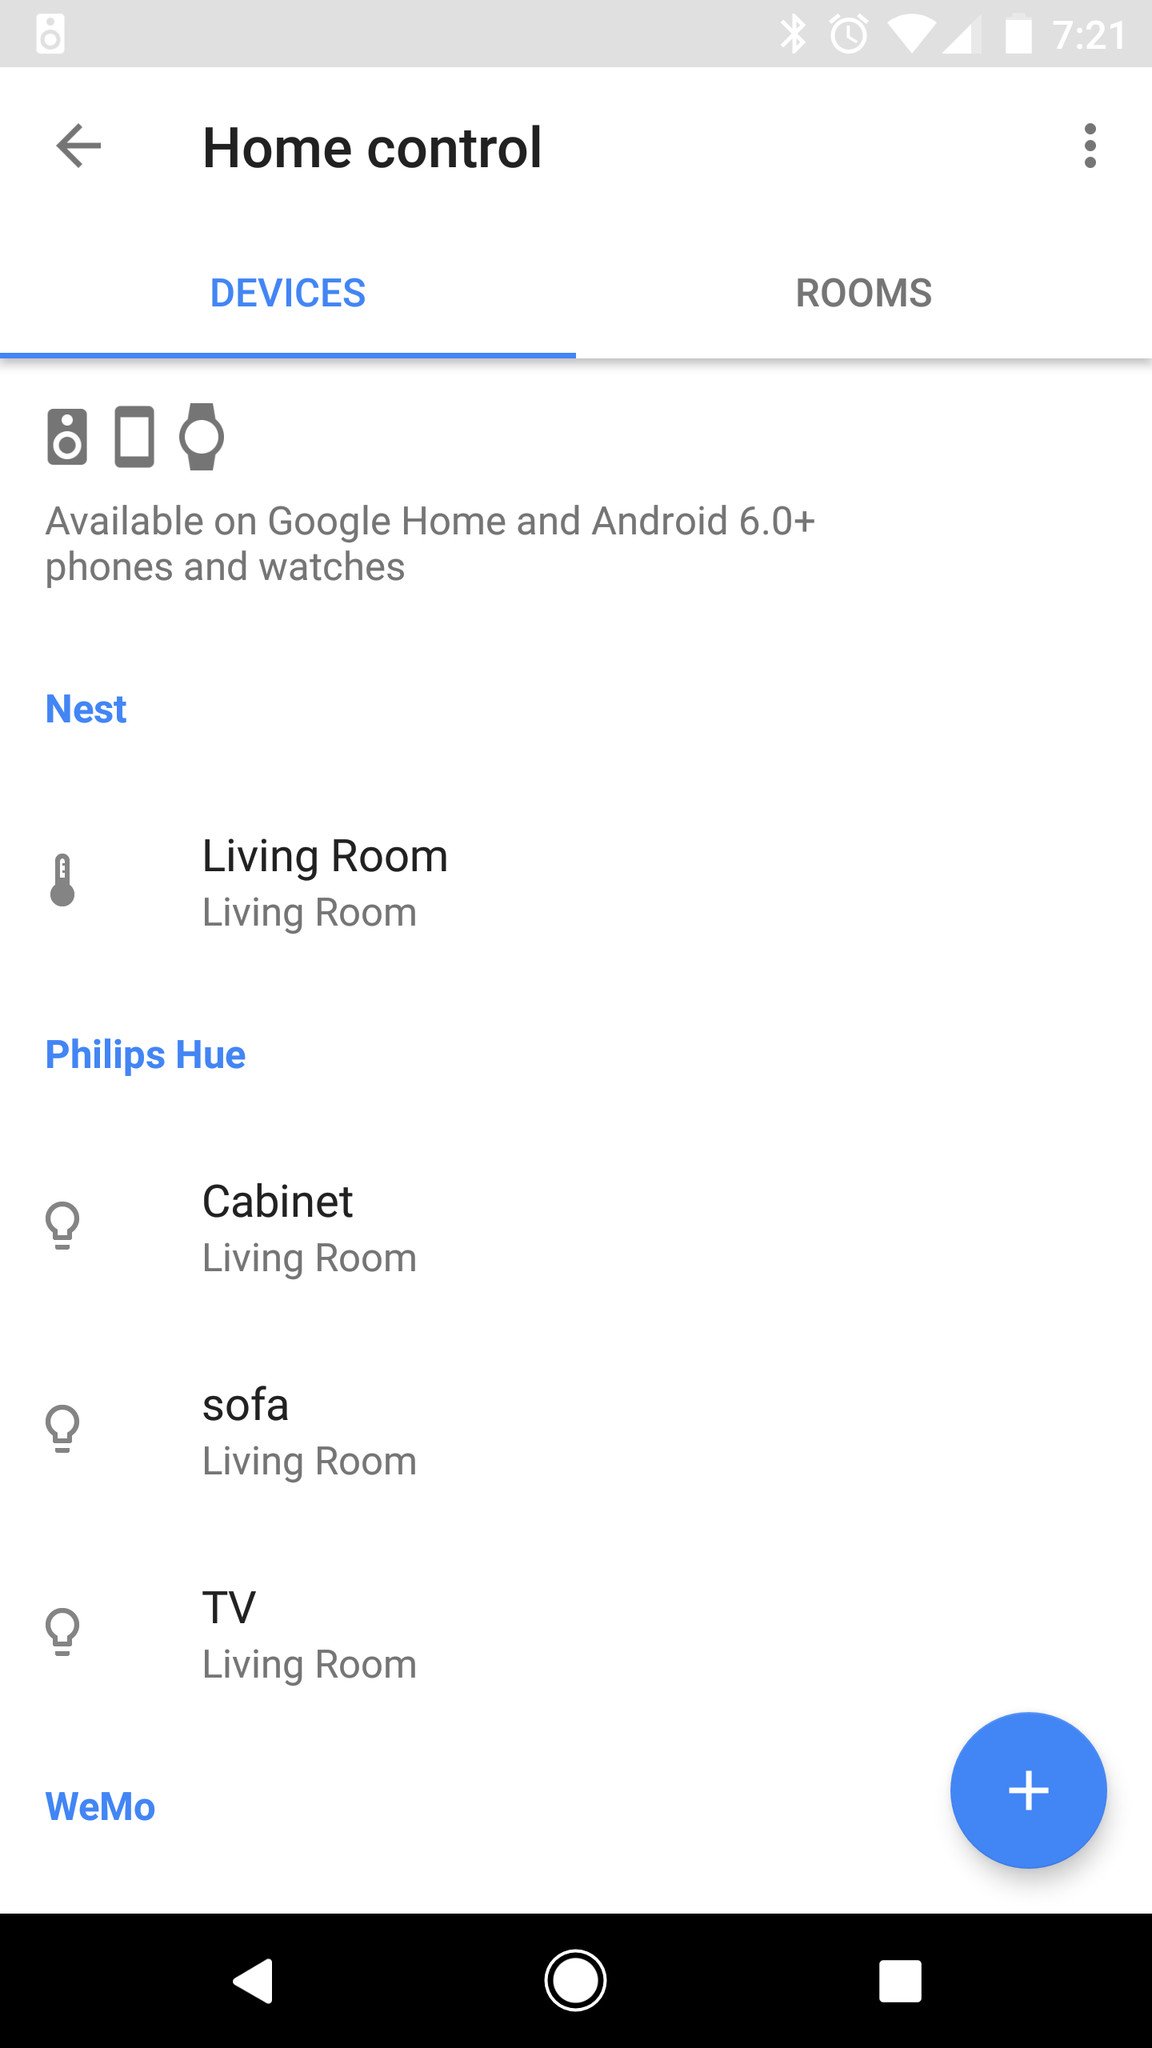 How To Link And Unlink Smart Device Services From The Google Home